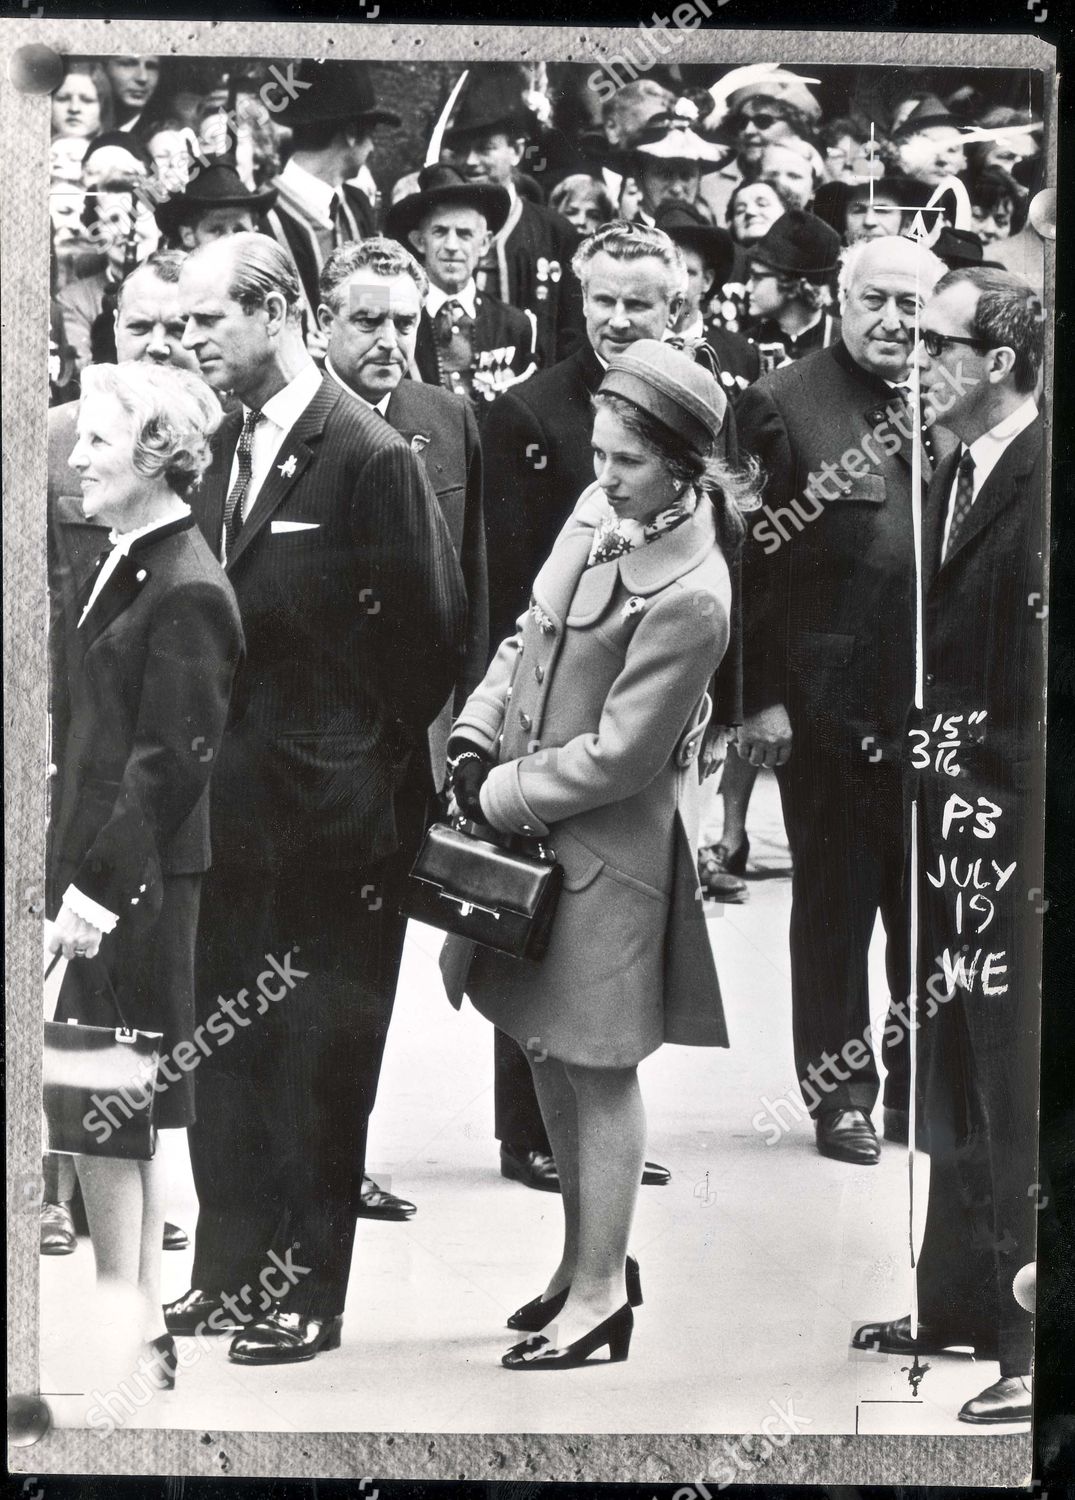 princess-anne-now-princess-royal-1968-picture-shows-princess-anne-attending-an-unspecified-engagement-with-her-father-prince-philip-shutterstock-editorial-890837a.jpg